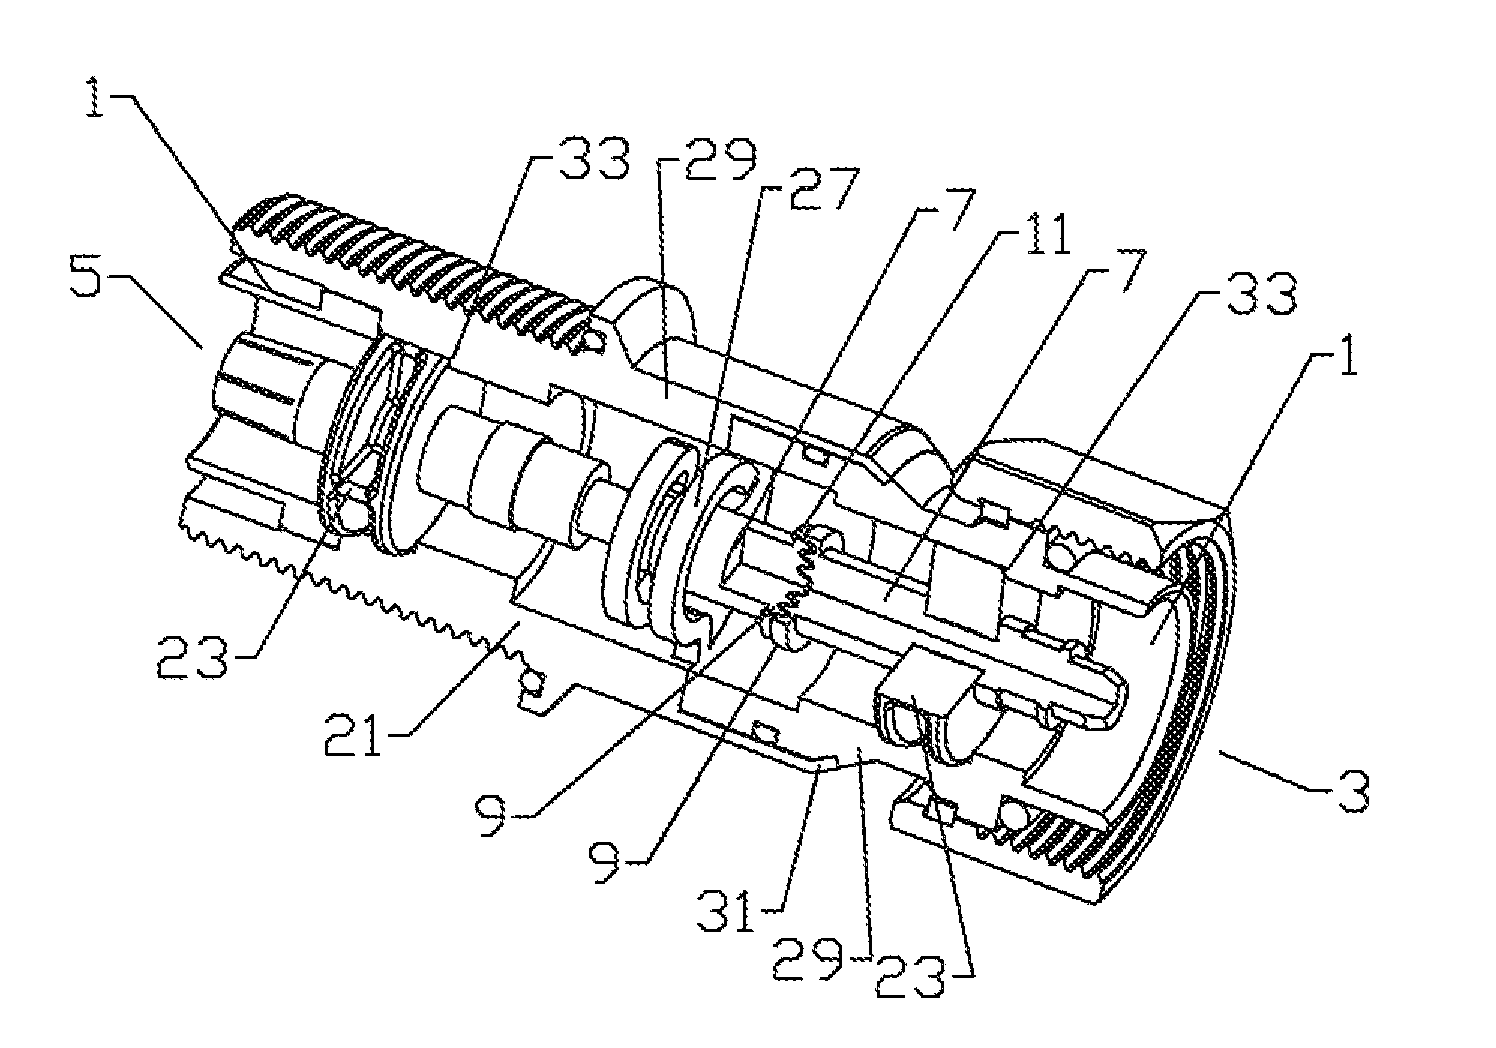 Folded surface capacitor in-line assembly